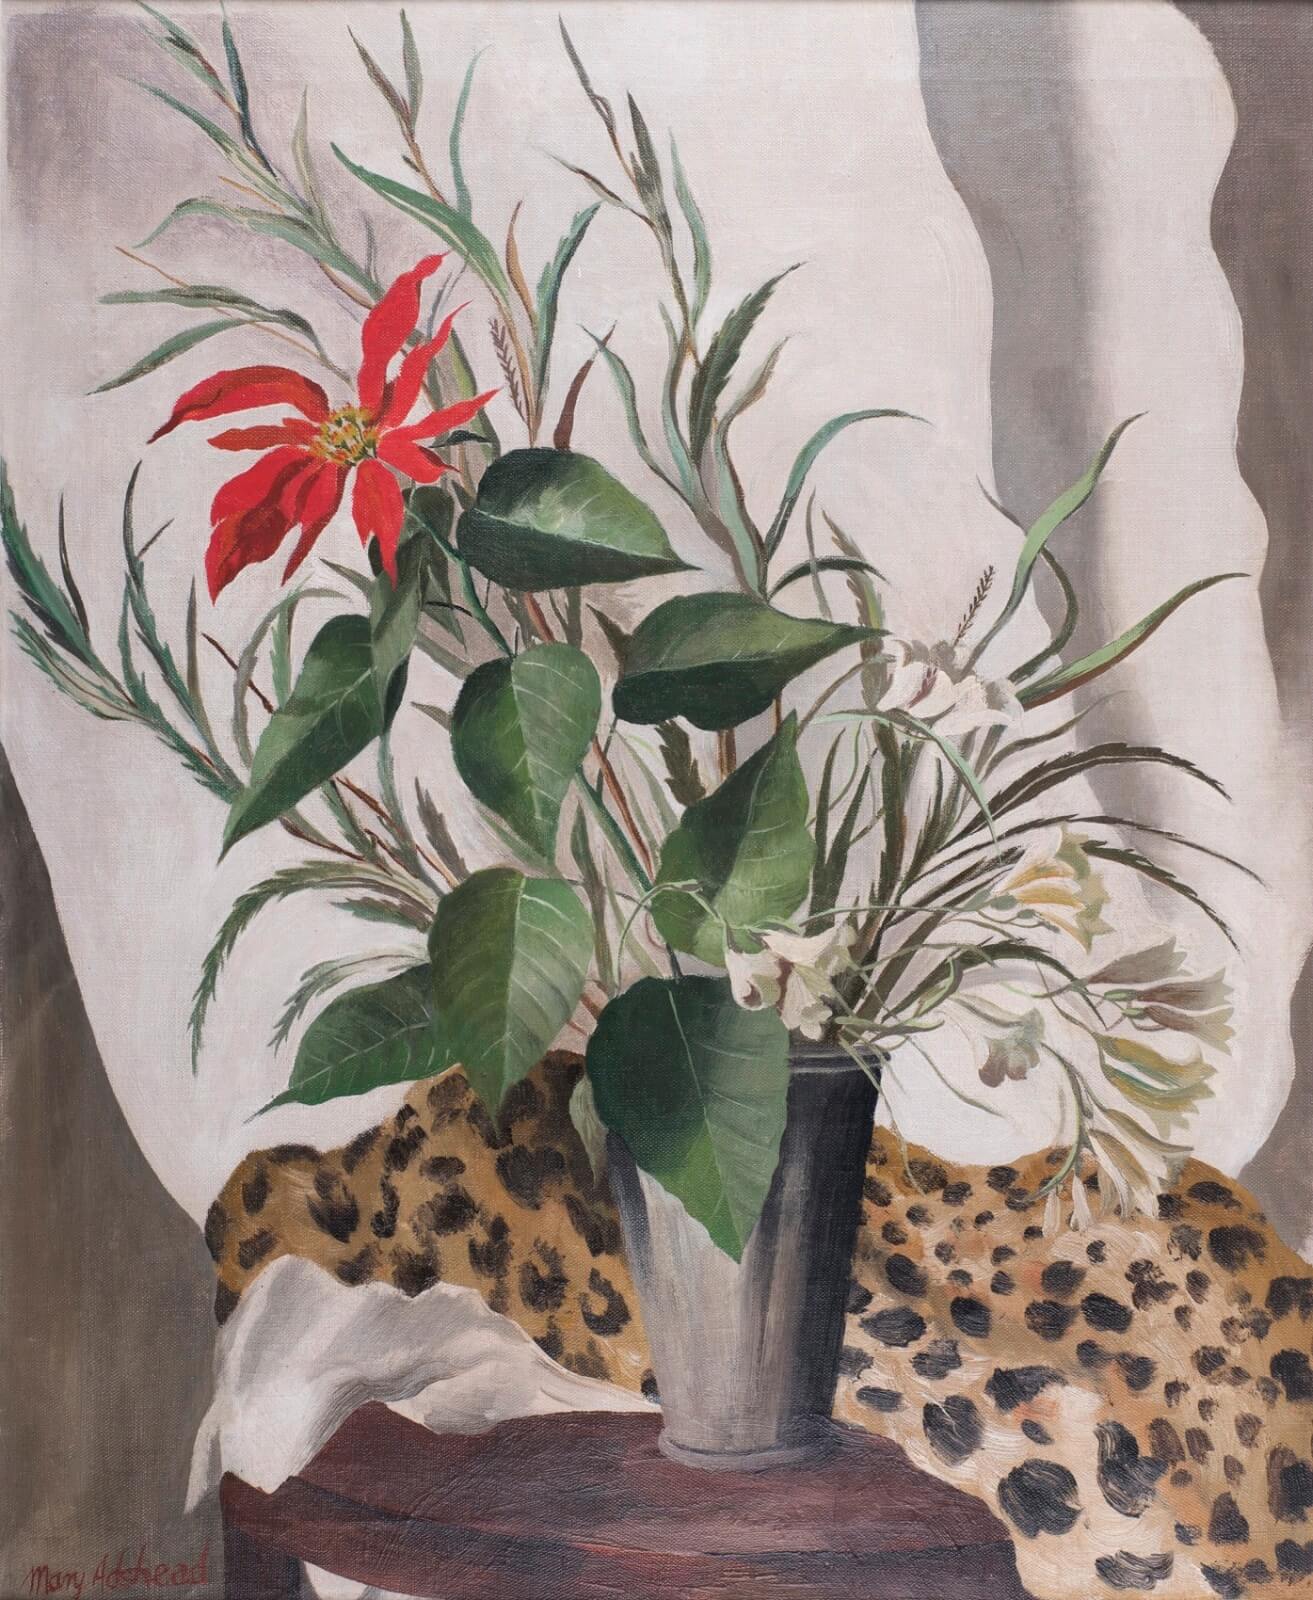 Mary Adshead - Still-life of Red Lily with Leopard Skin